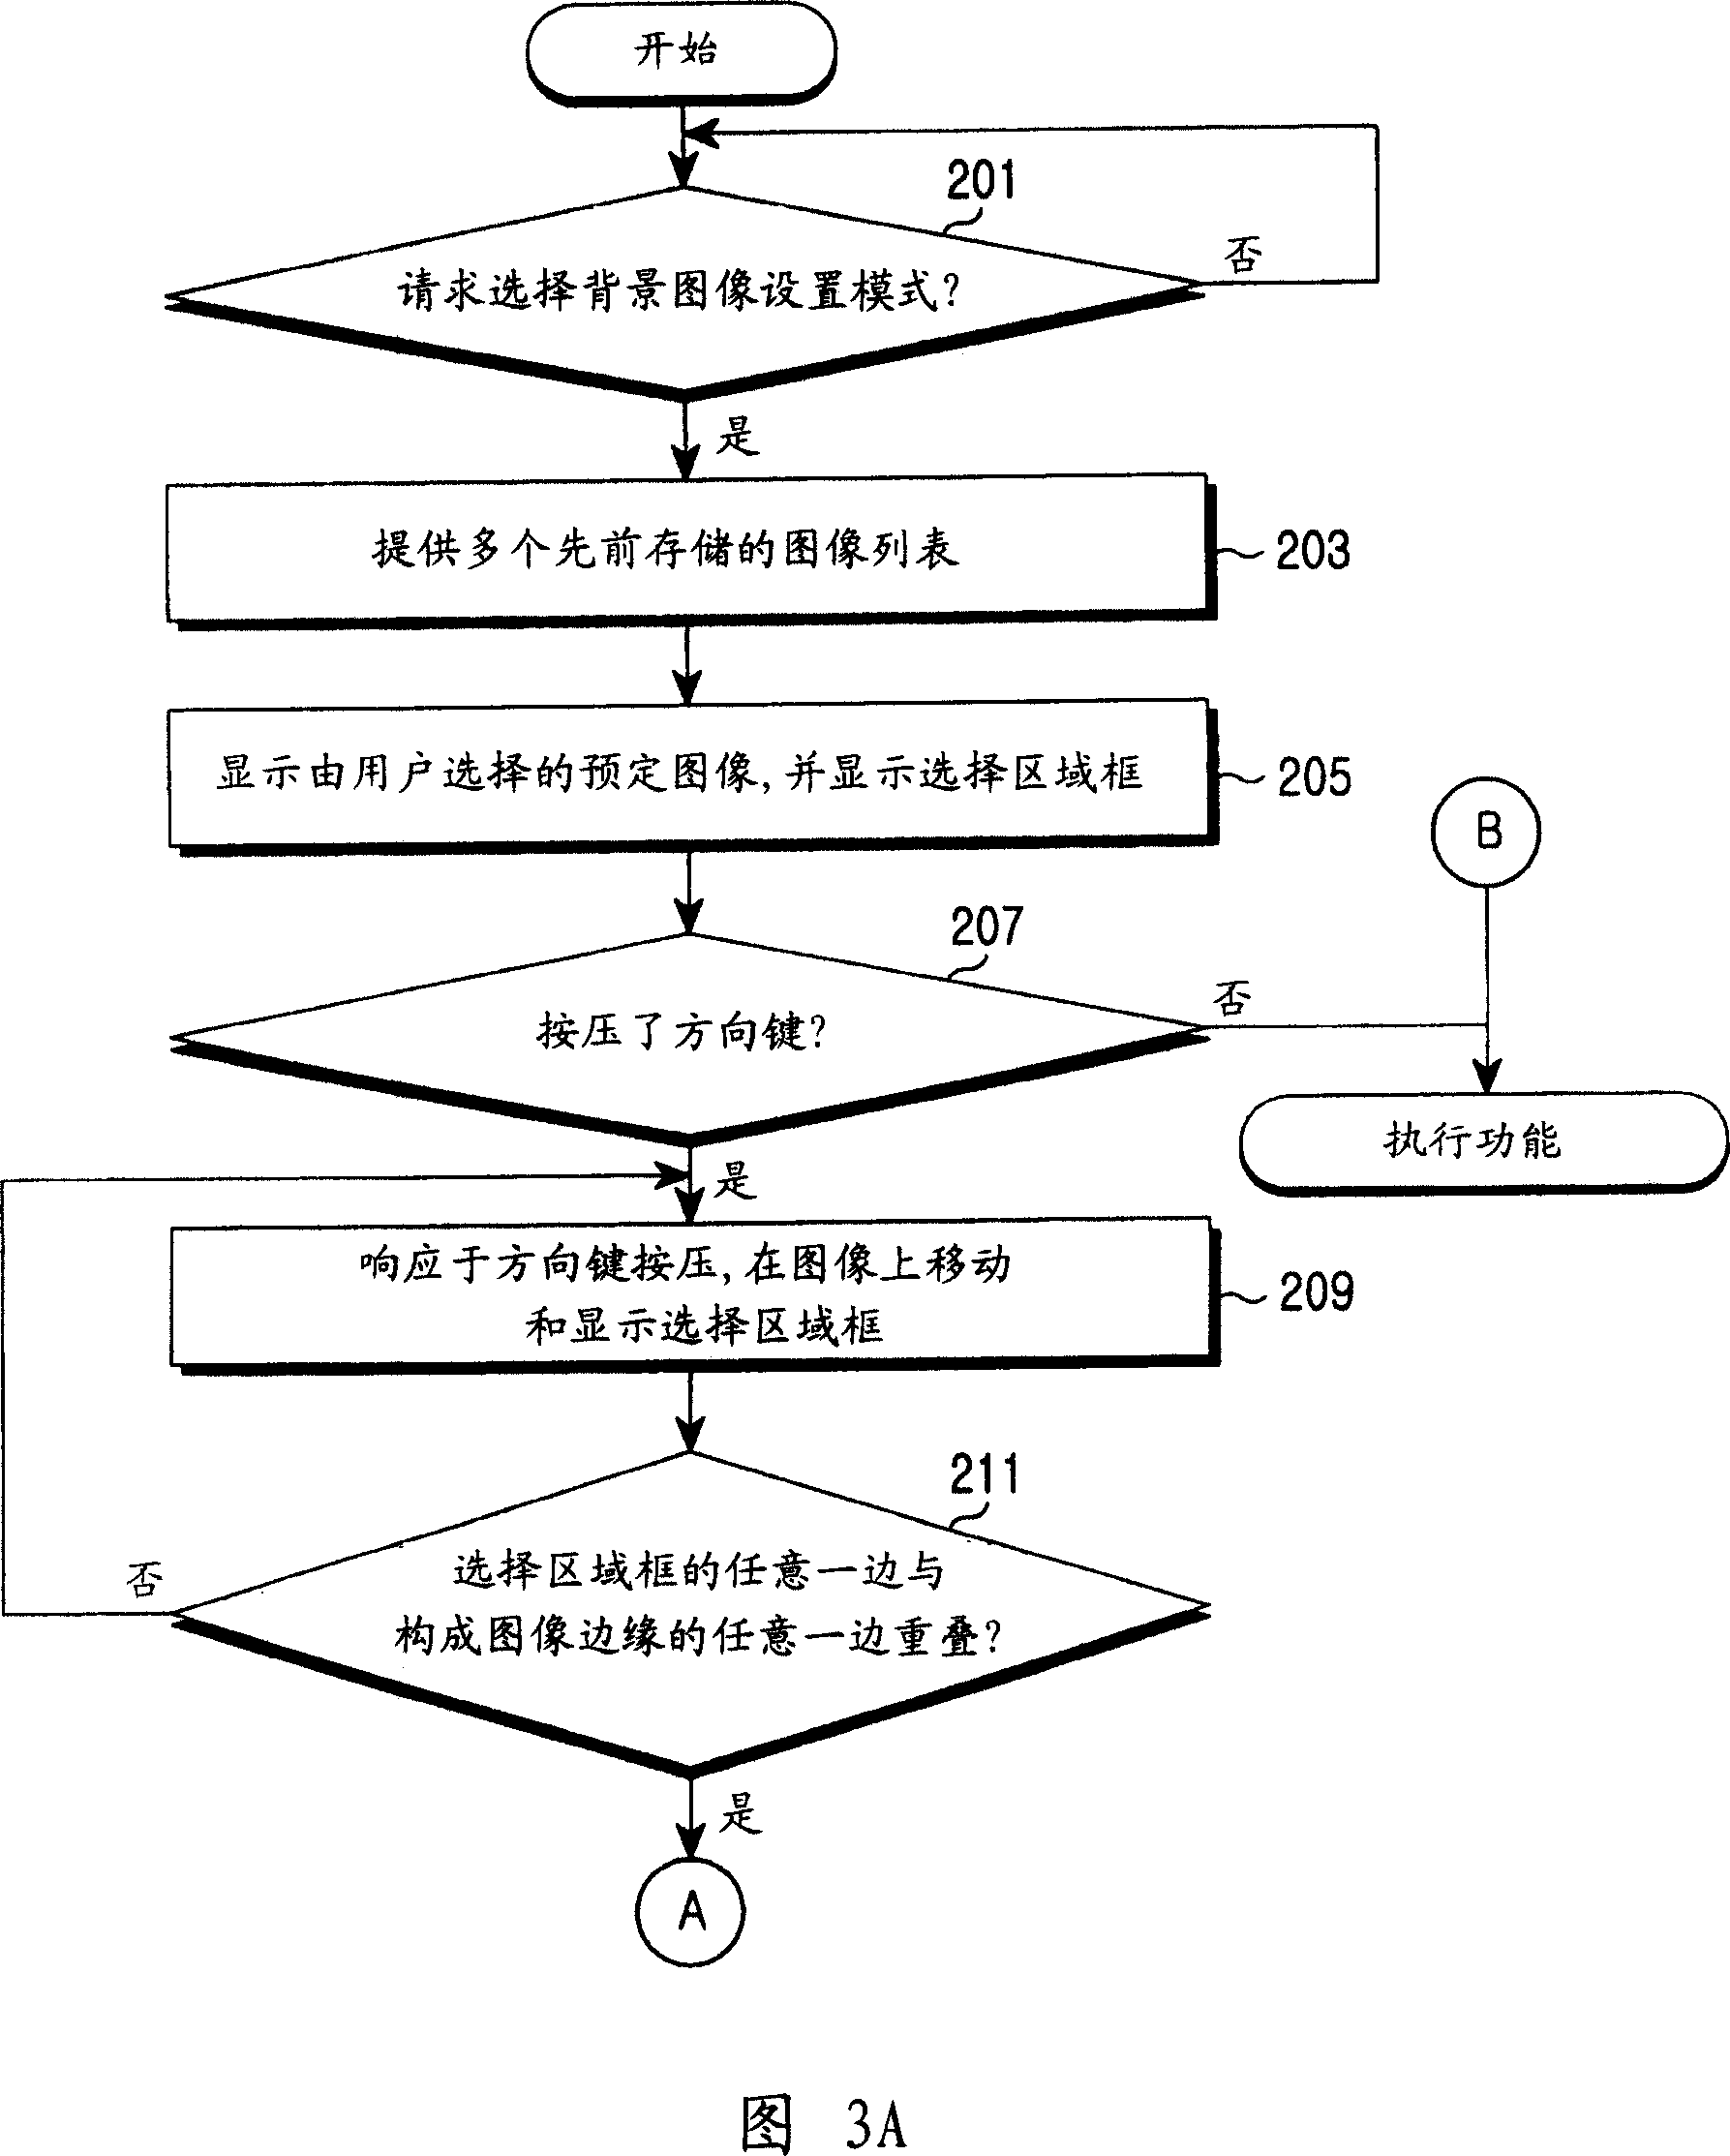 Method for displaying background image in mobile communication terminal